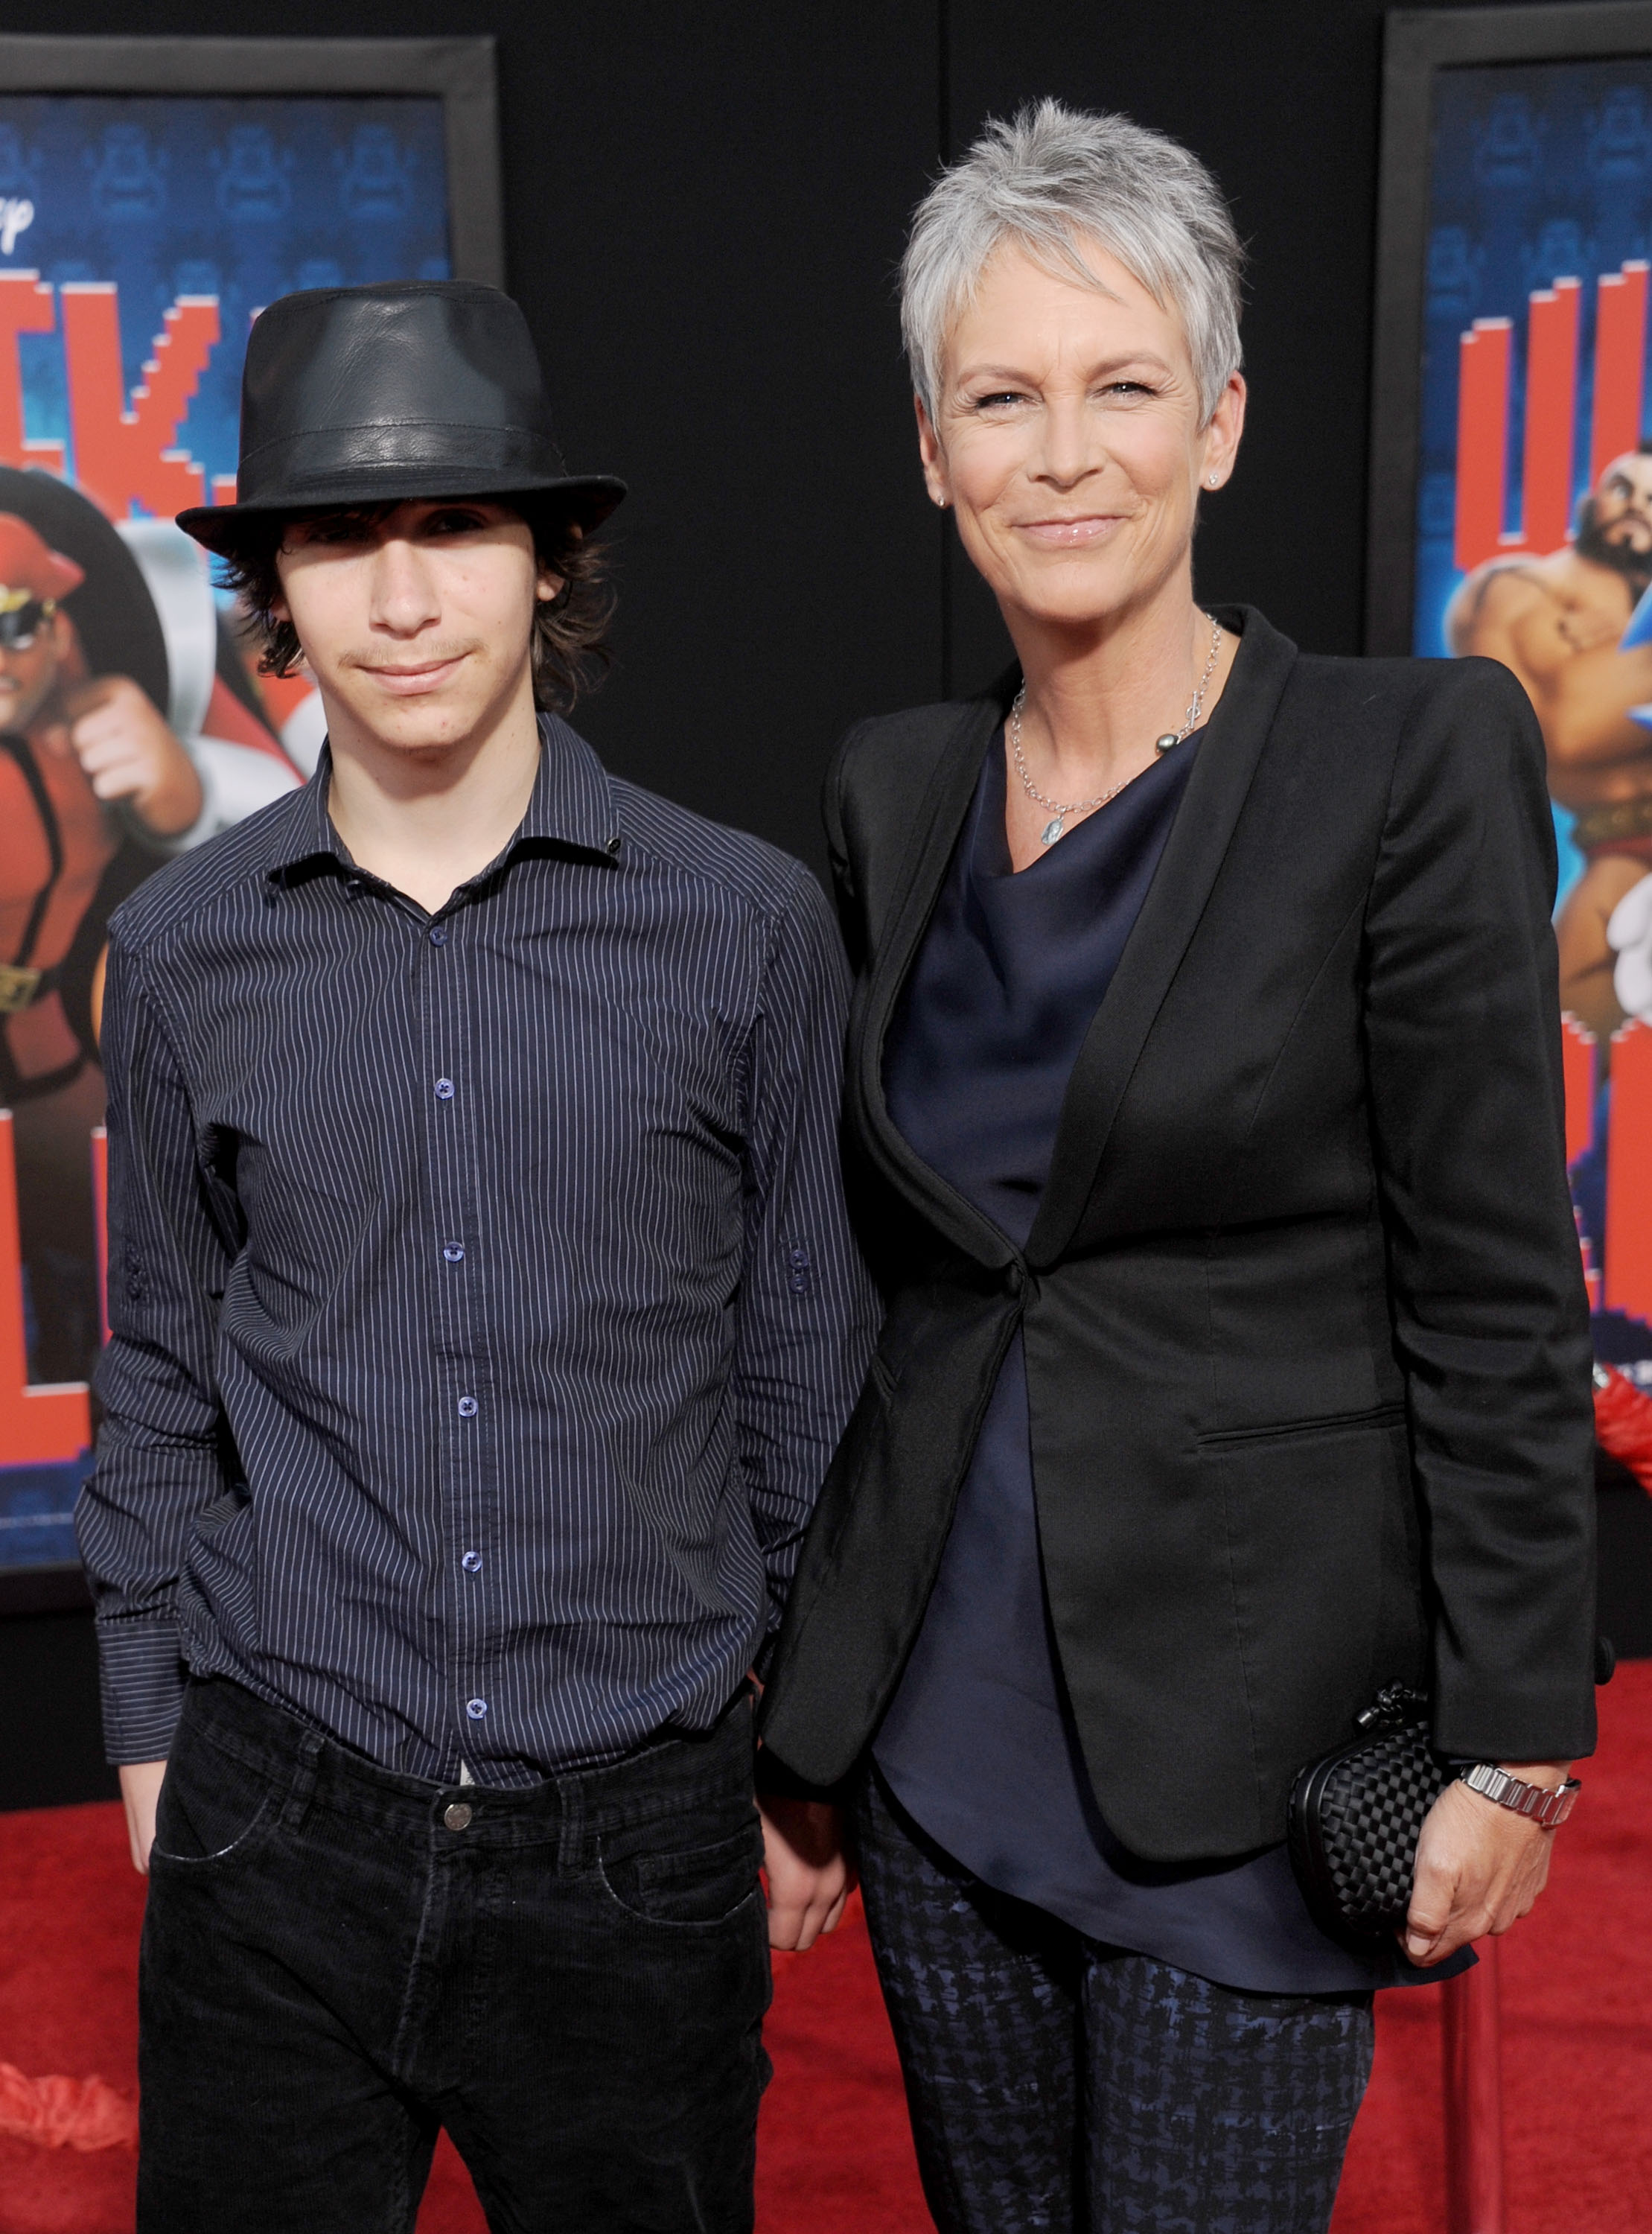 How Jamie Lee Curtis’ Child, Ruby, Would Look Today If She Had Never ...